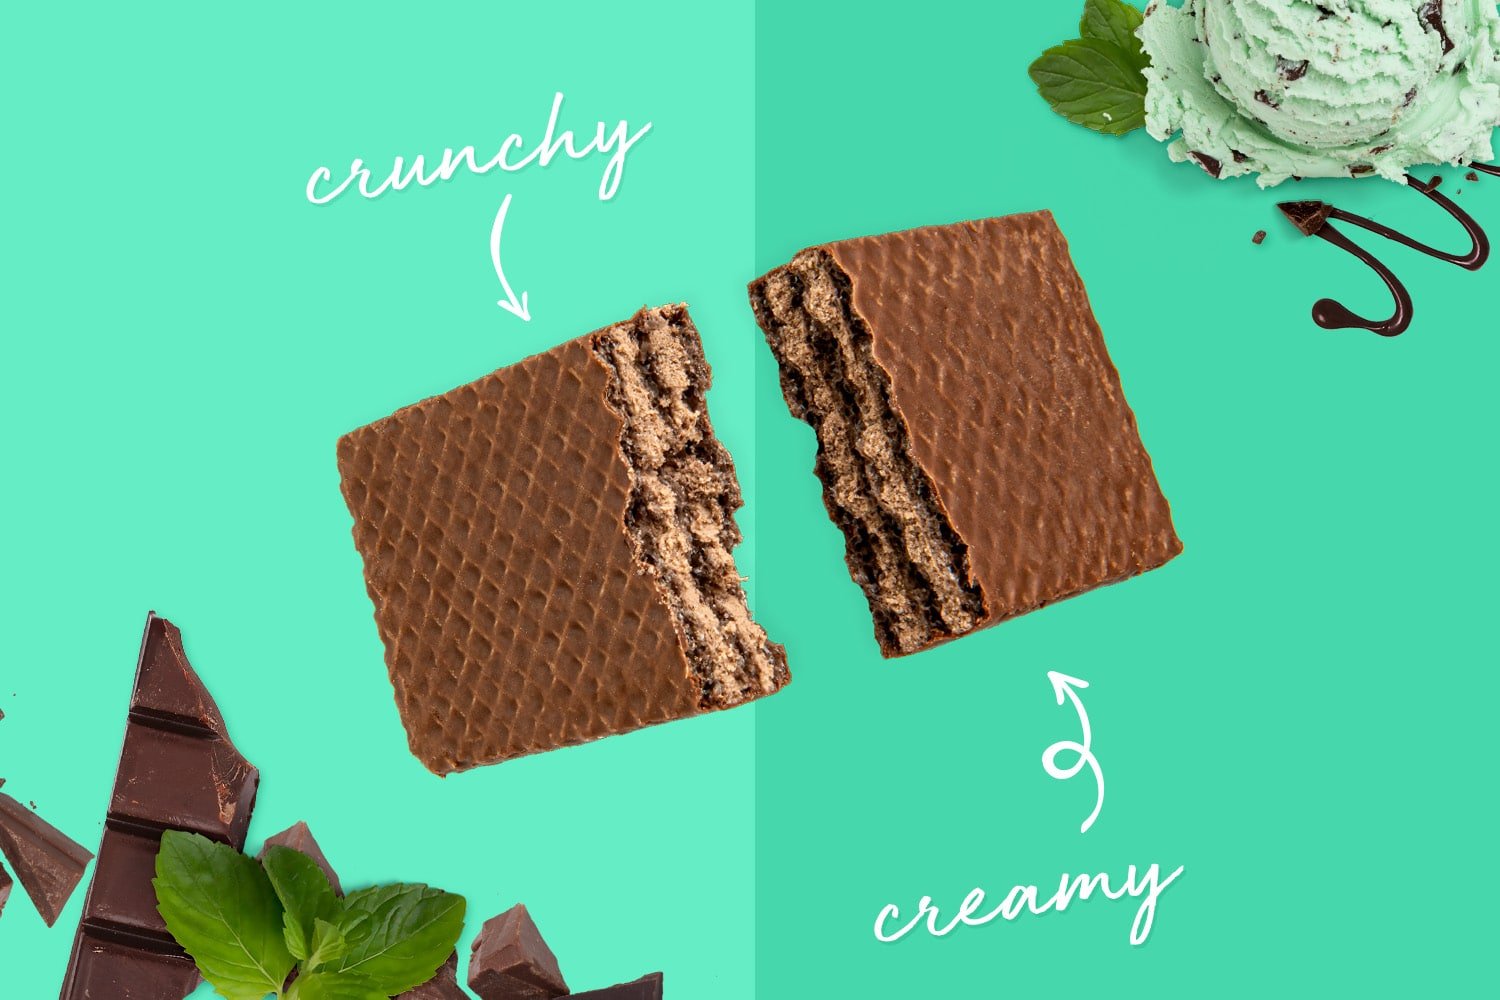 Creamy and crunchy wafer protein bars in PRO Chocolate Mint